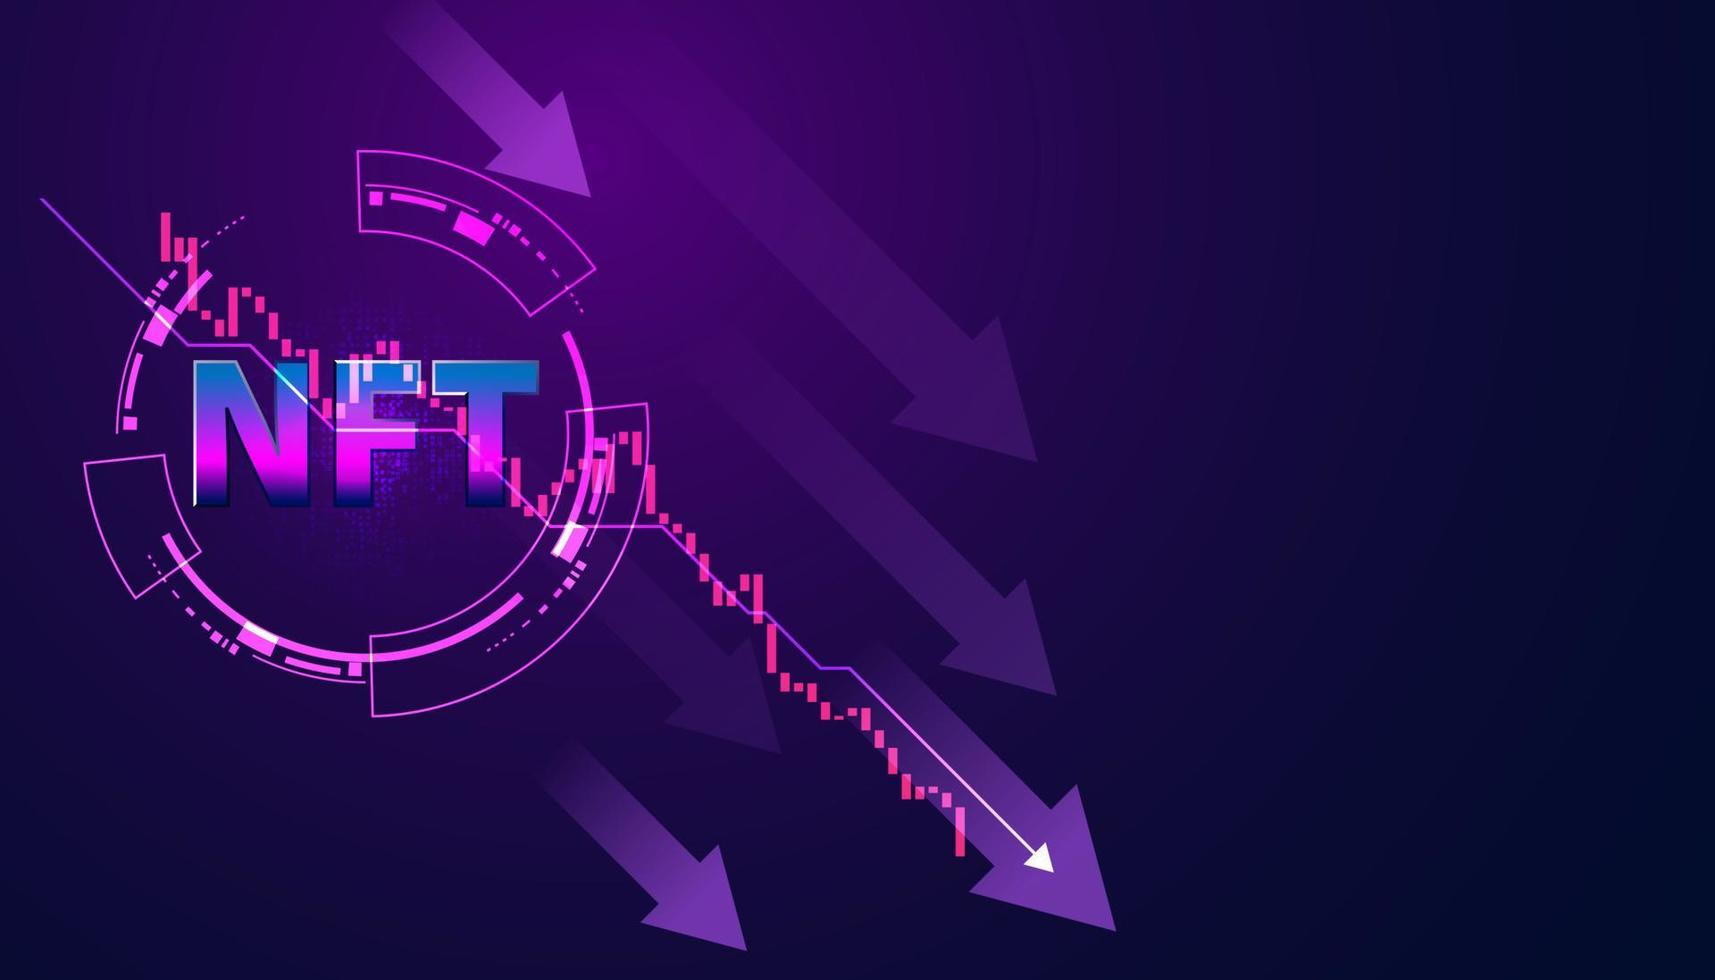 Abstract NFT Digital Trading Image in the downtrend Descending from the highest point on the background for entering text vector